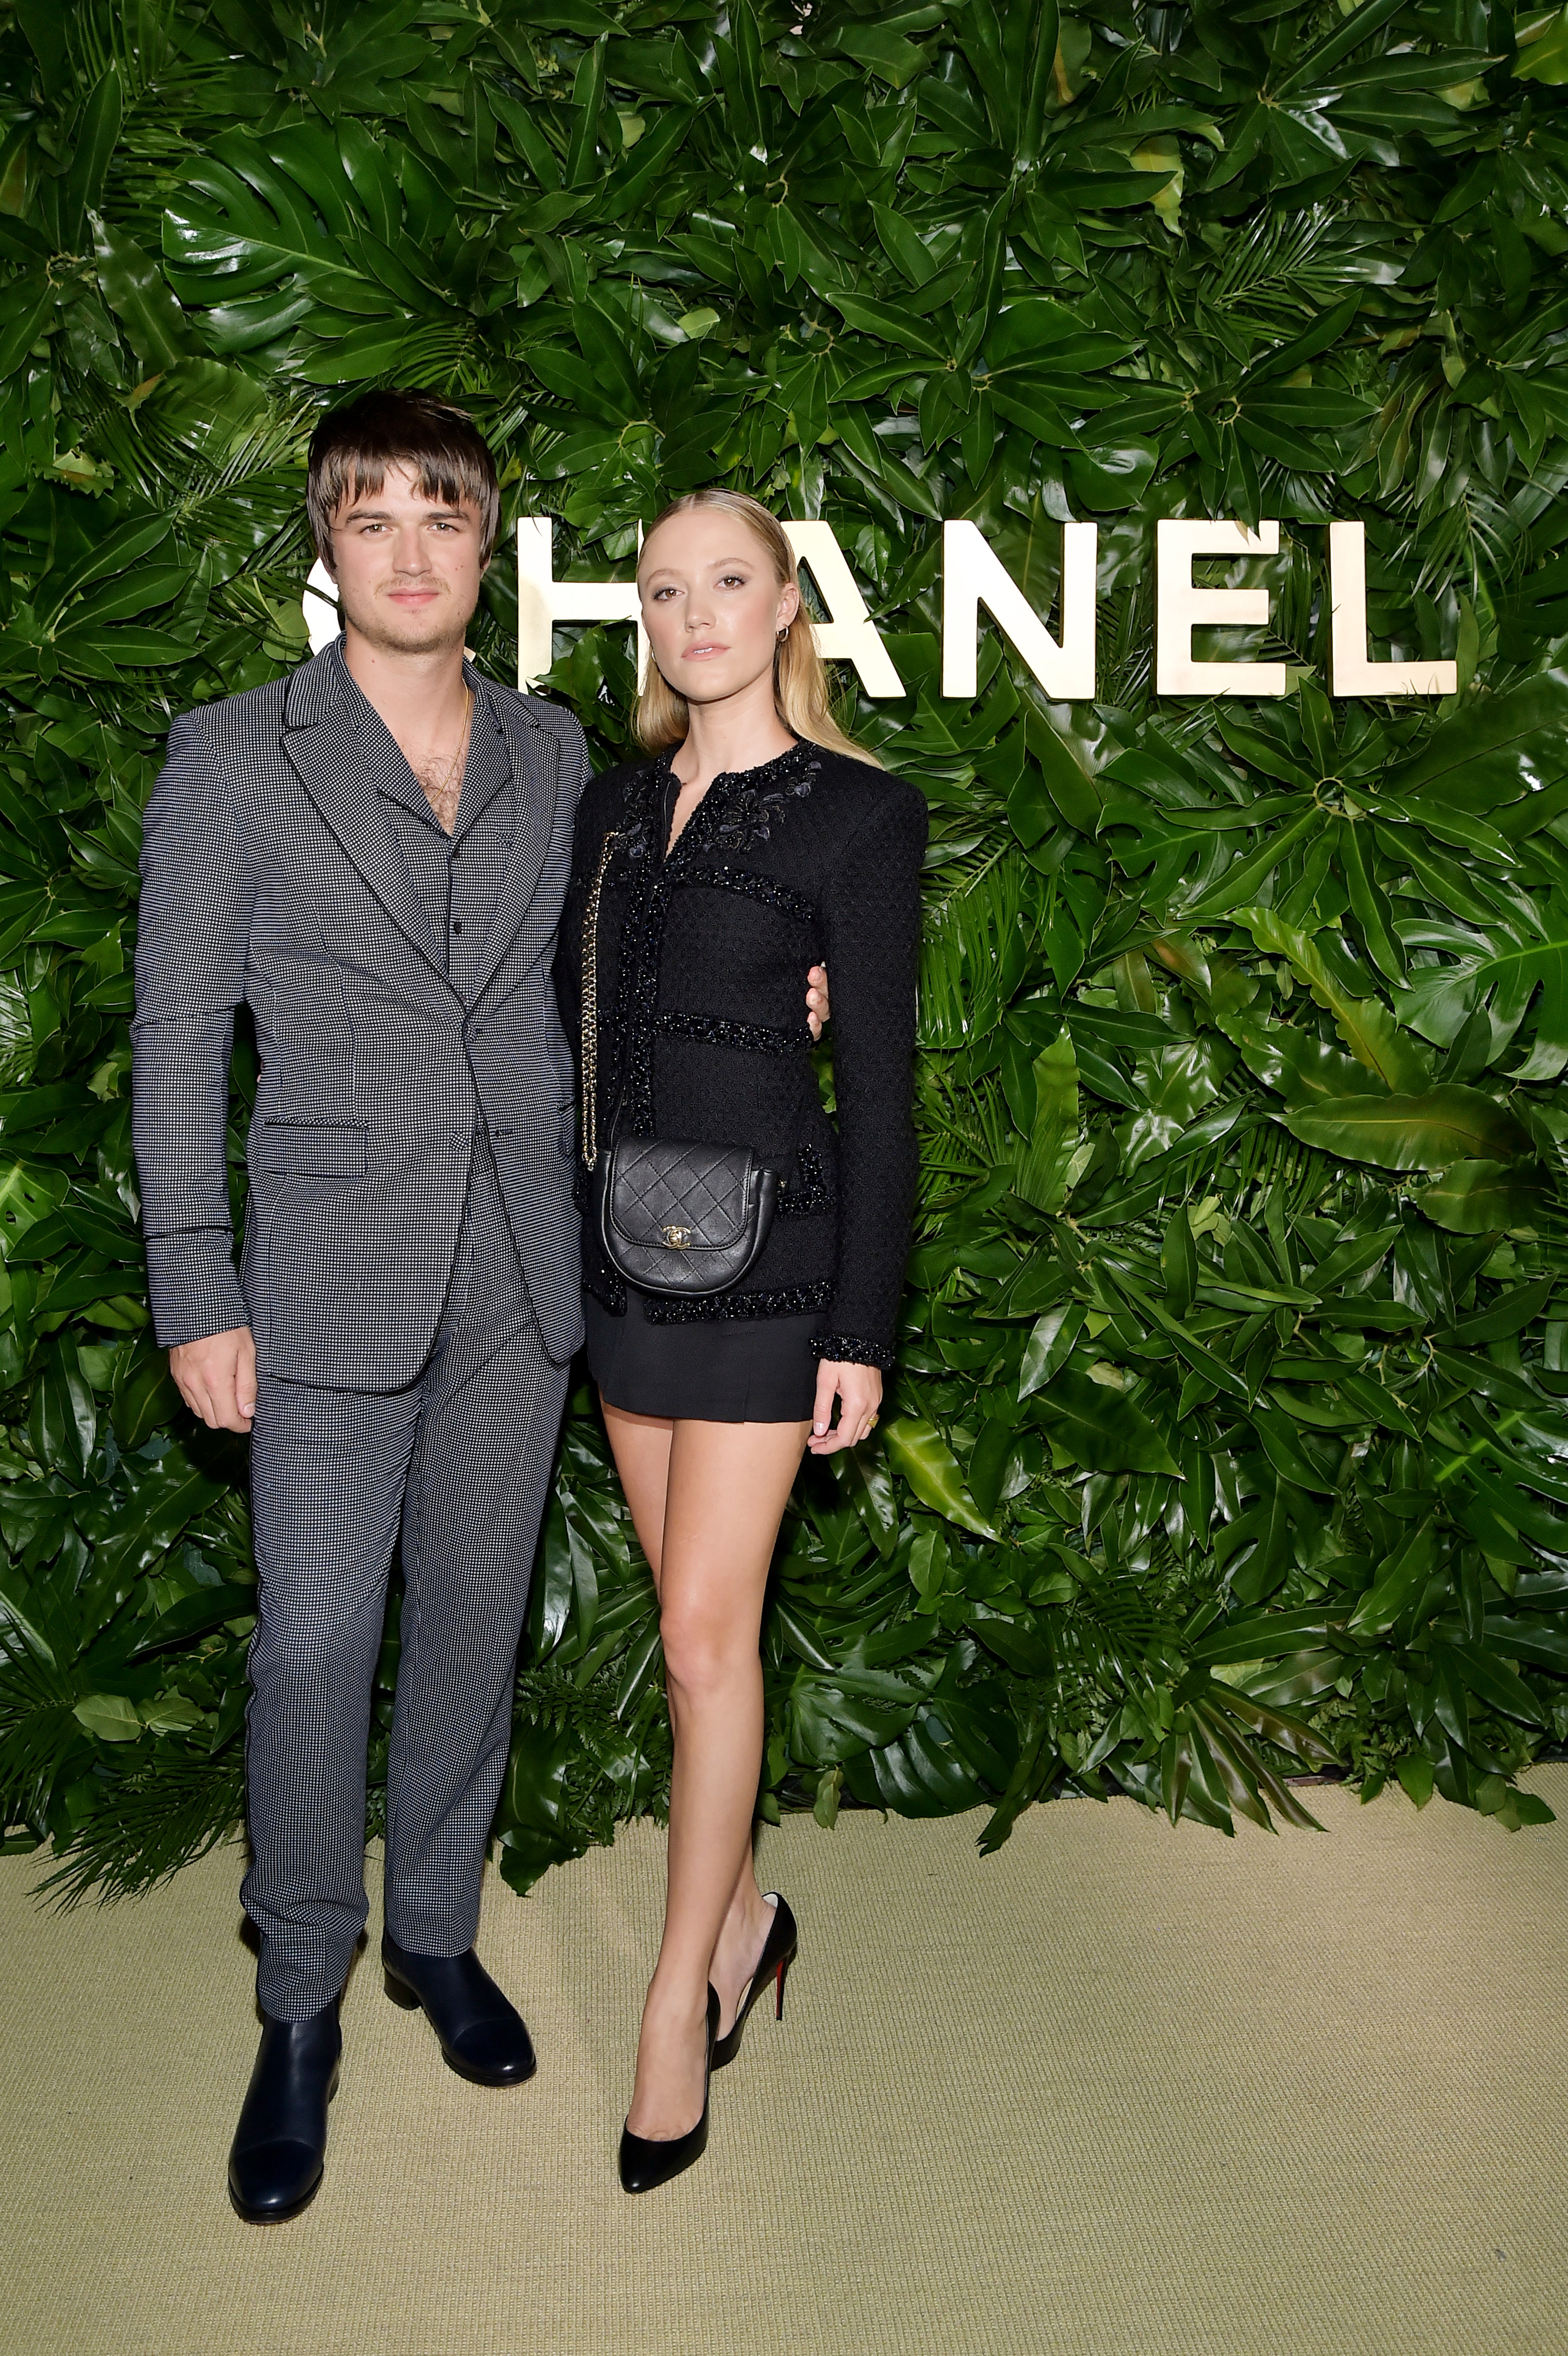 Joe Keery and Maika Monroe attend a Chanel event on September 12, 2019 in Los Angeles, California. (Stefanie Keenan—WireImage/Getty Images)